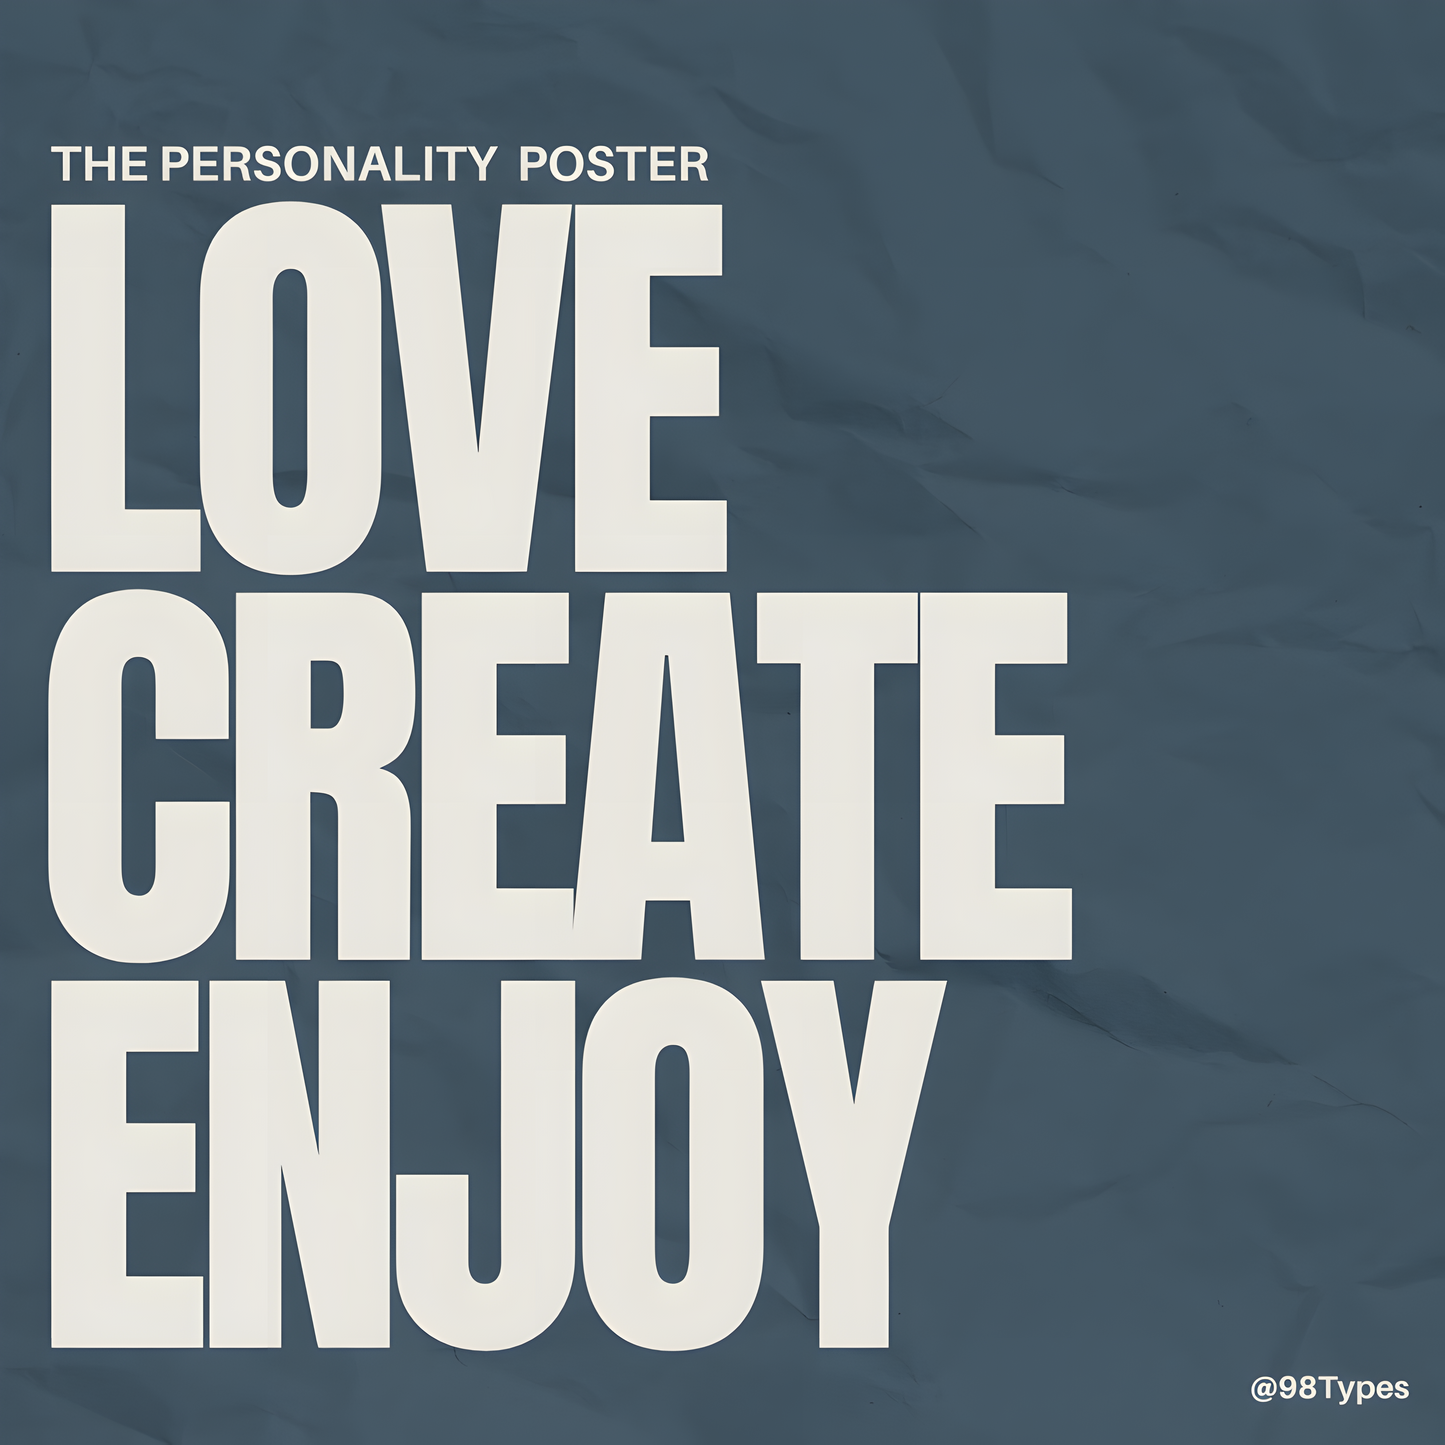 The Fisherman Personality Poster